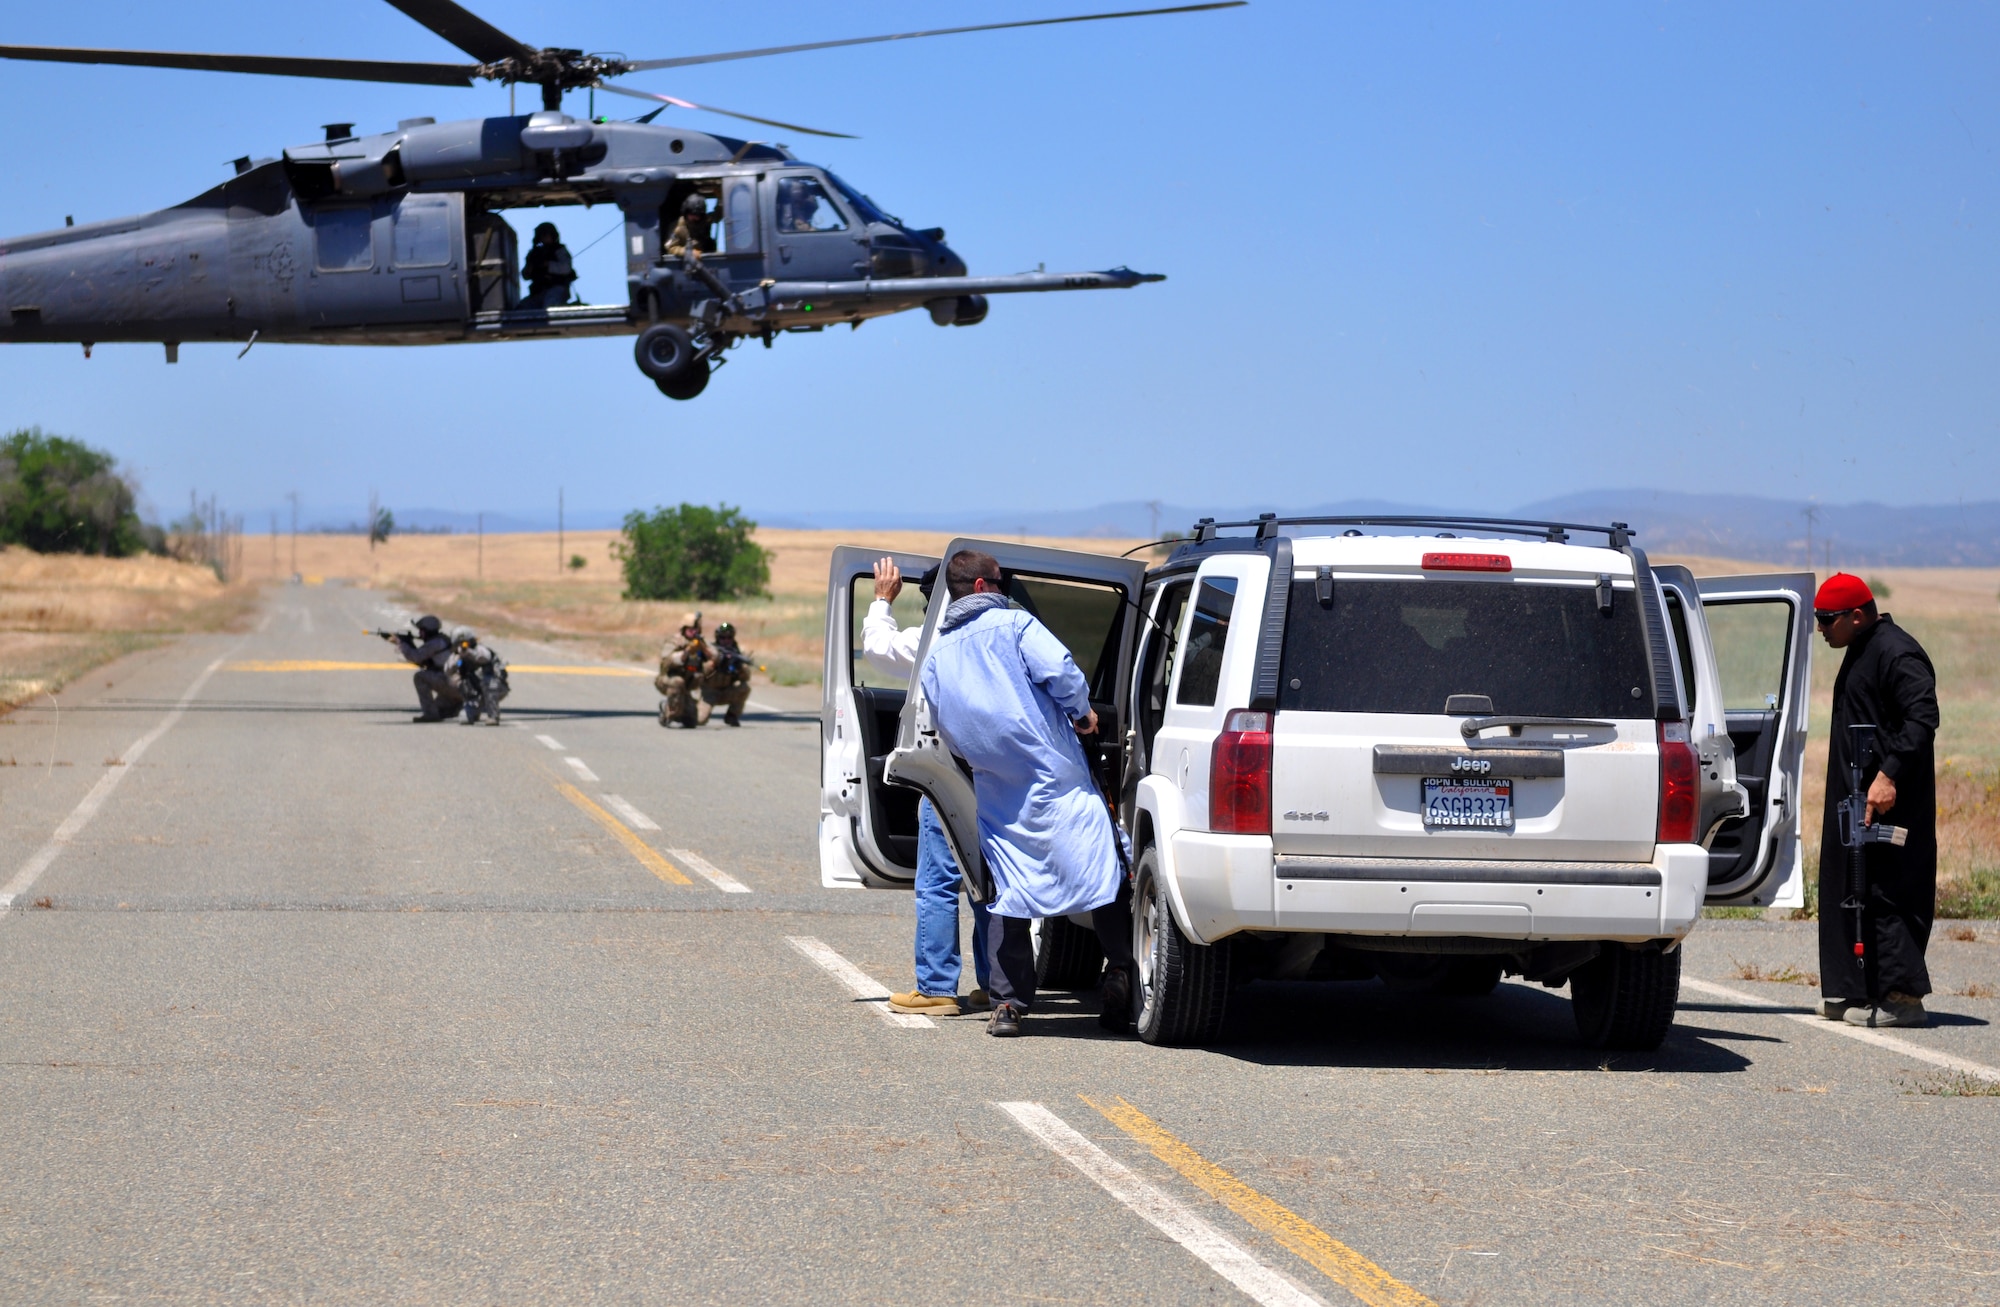 Members from the 129th Rescue Squadron and special operations forces perform vehicle interdiction during a combat search and rescue exercise at Beale Air Force Base, Calif., May 31, 2013. The squadron utilizes the HH-60G Pave Hawk for its CSAR missions. (U.S. Air Force photo by Robert Scott/Released)